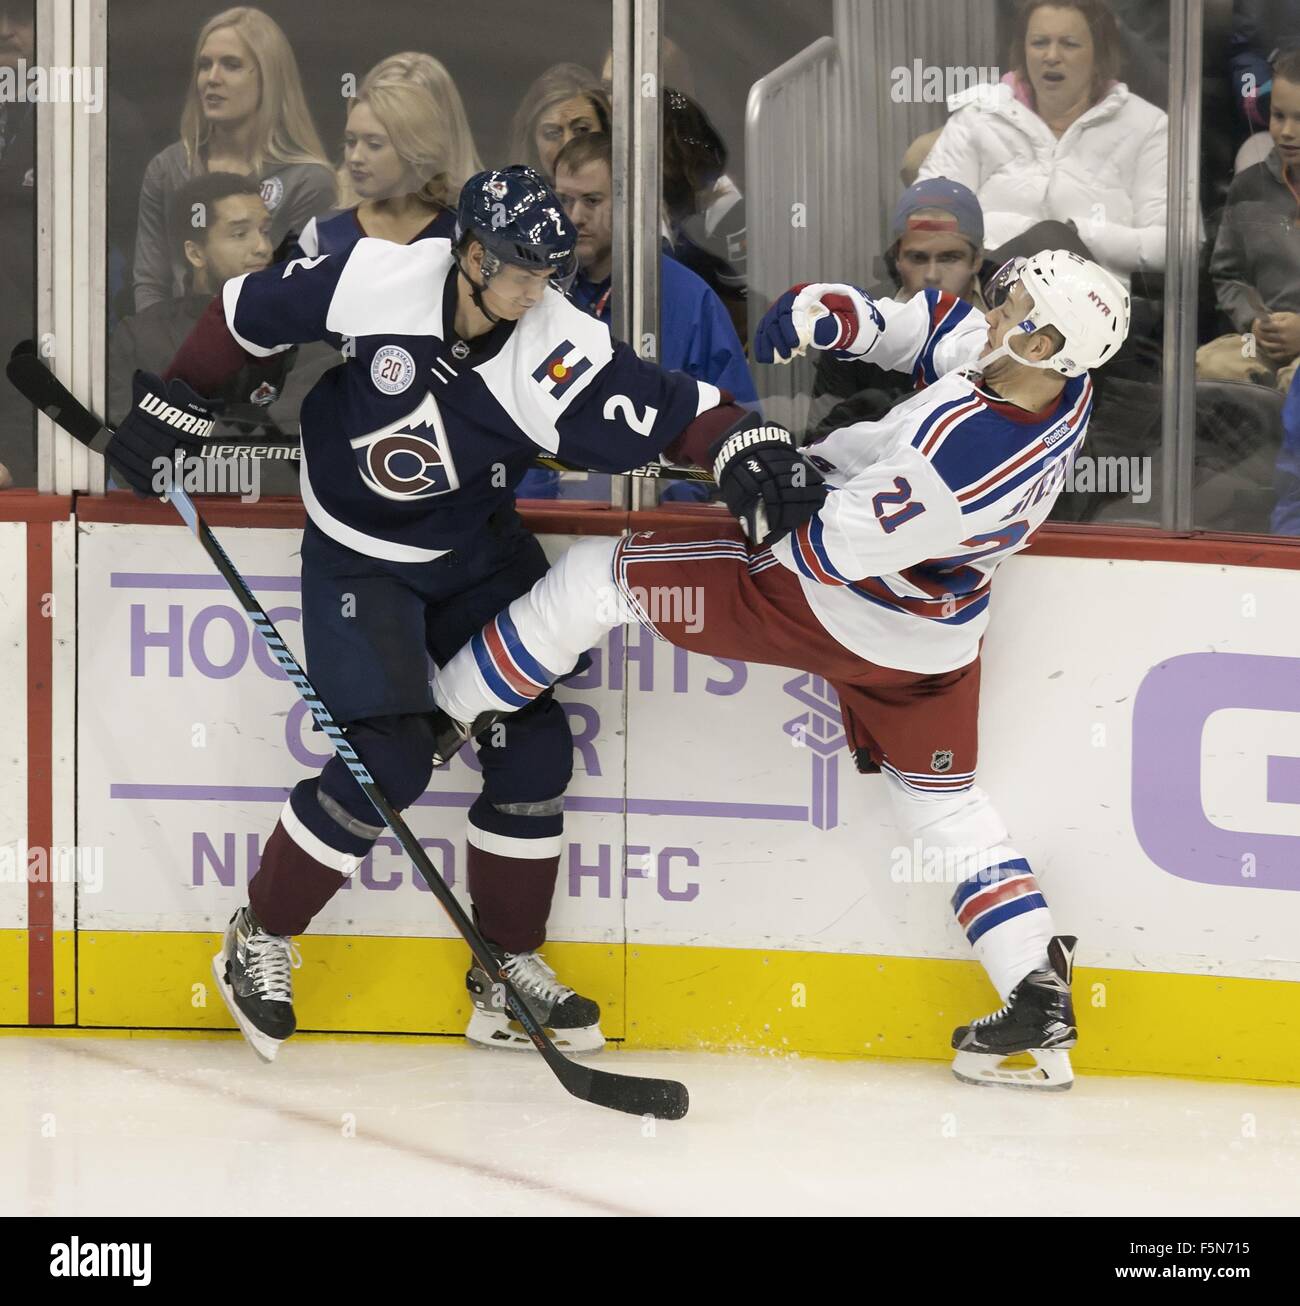 Denver, Colorado, USA. 6th Nov, 2015. Avalanche D NICK HOLDEN, left, checks Rangers C DEREK STEPAN, right, during the 3rd. period at the Pepsi Center Friday night. The Avs lose to the Rangers 2-1. Credit:  Hector Acevedo/ZUMA Wire/Alamy Live News Stock Photo